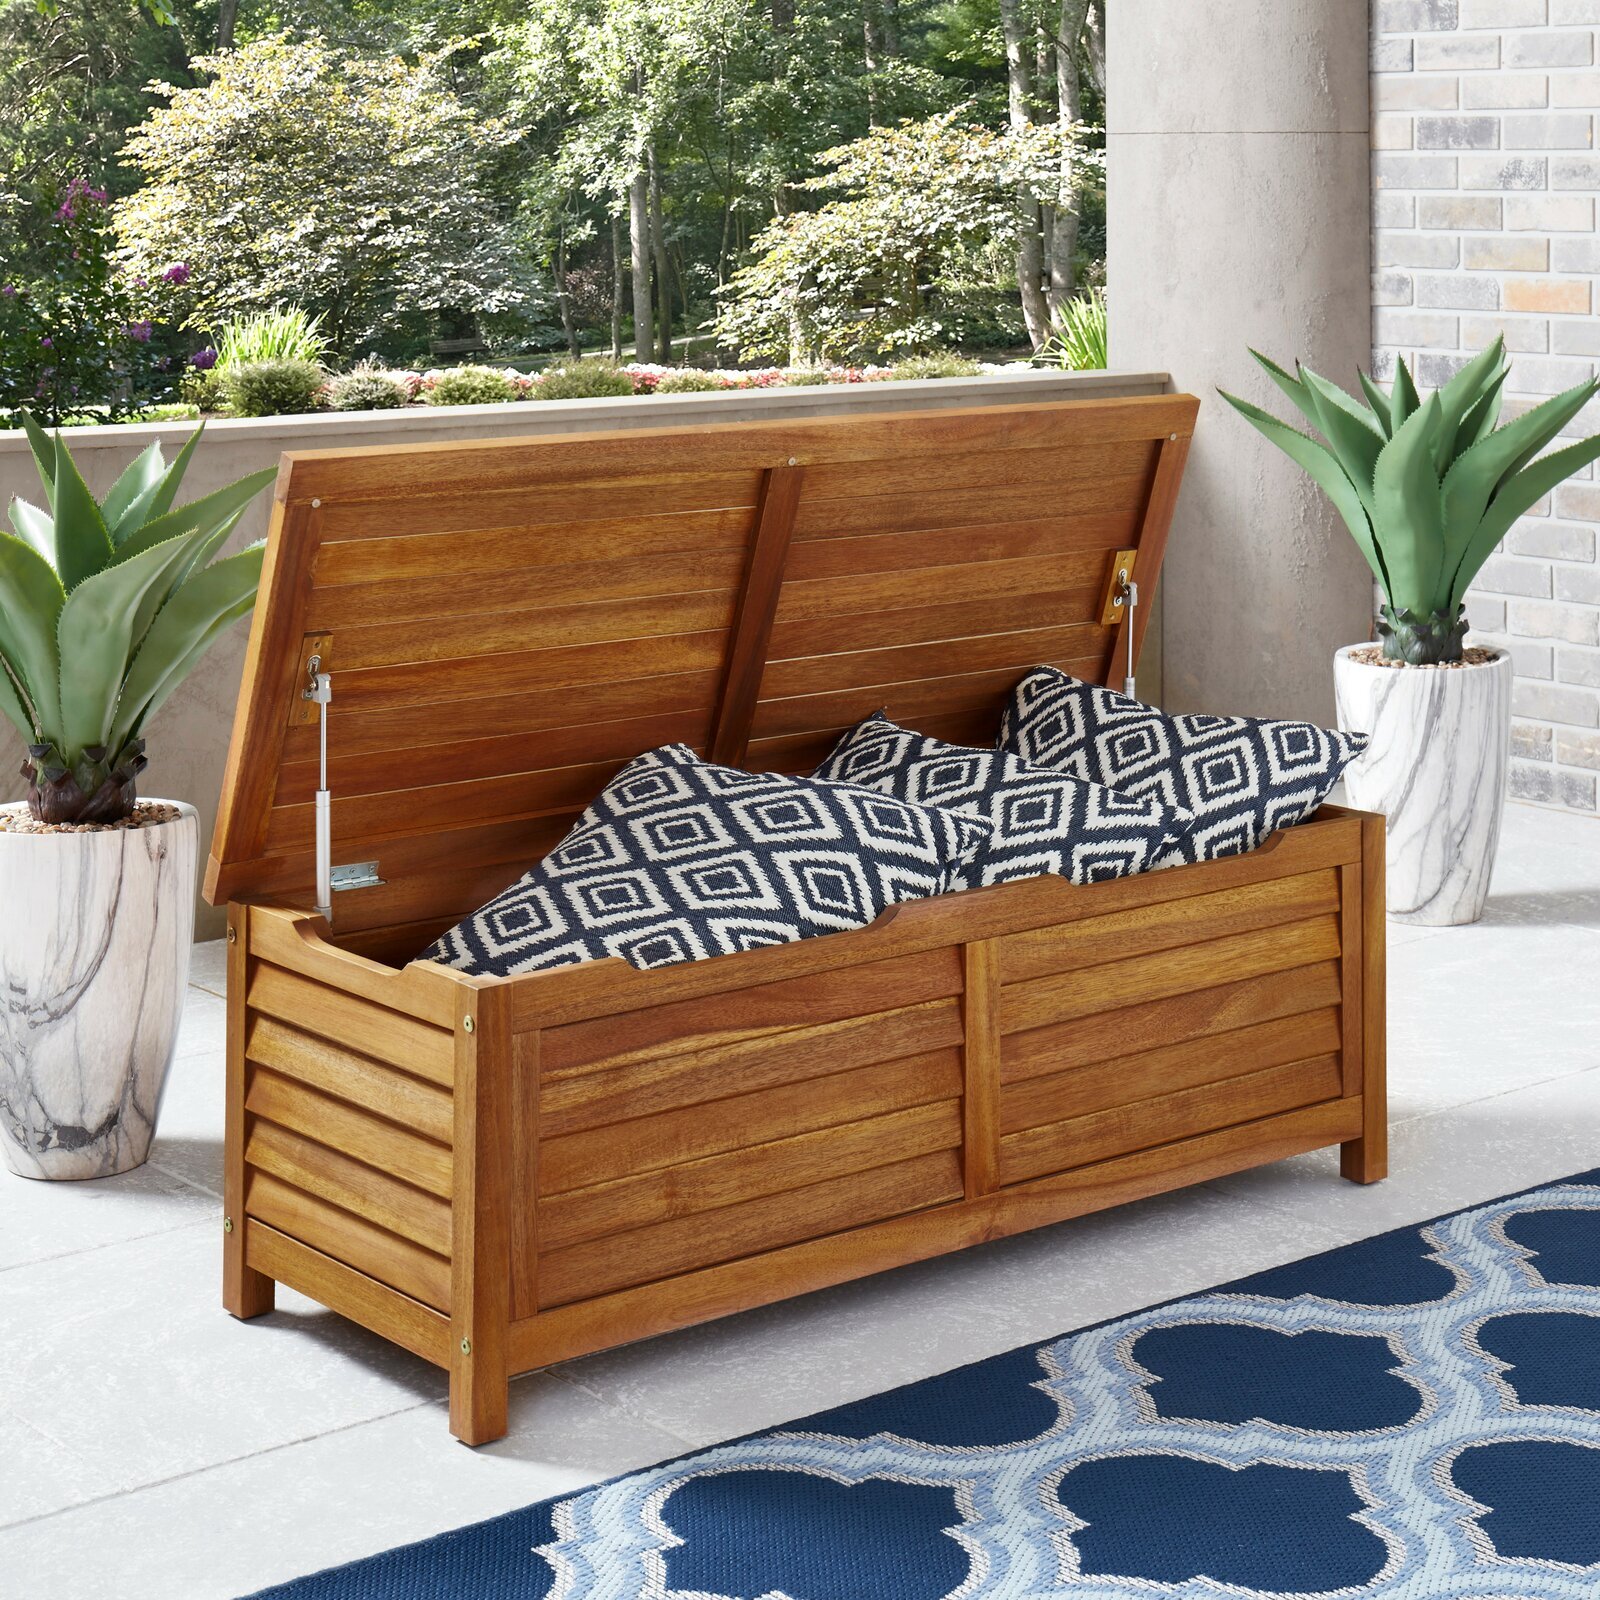 Sand & Stable™ Amagansett 78,87 Gallons Gallon Water Resistant Acacia Solid Wood Deck Box